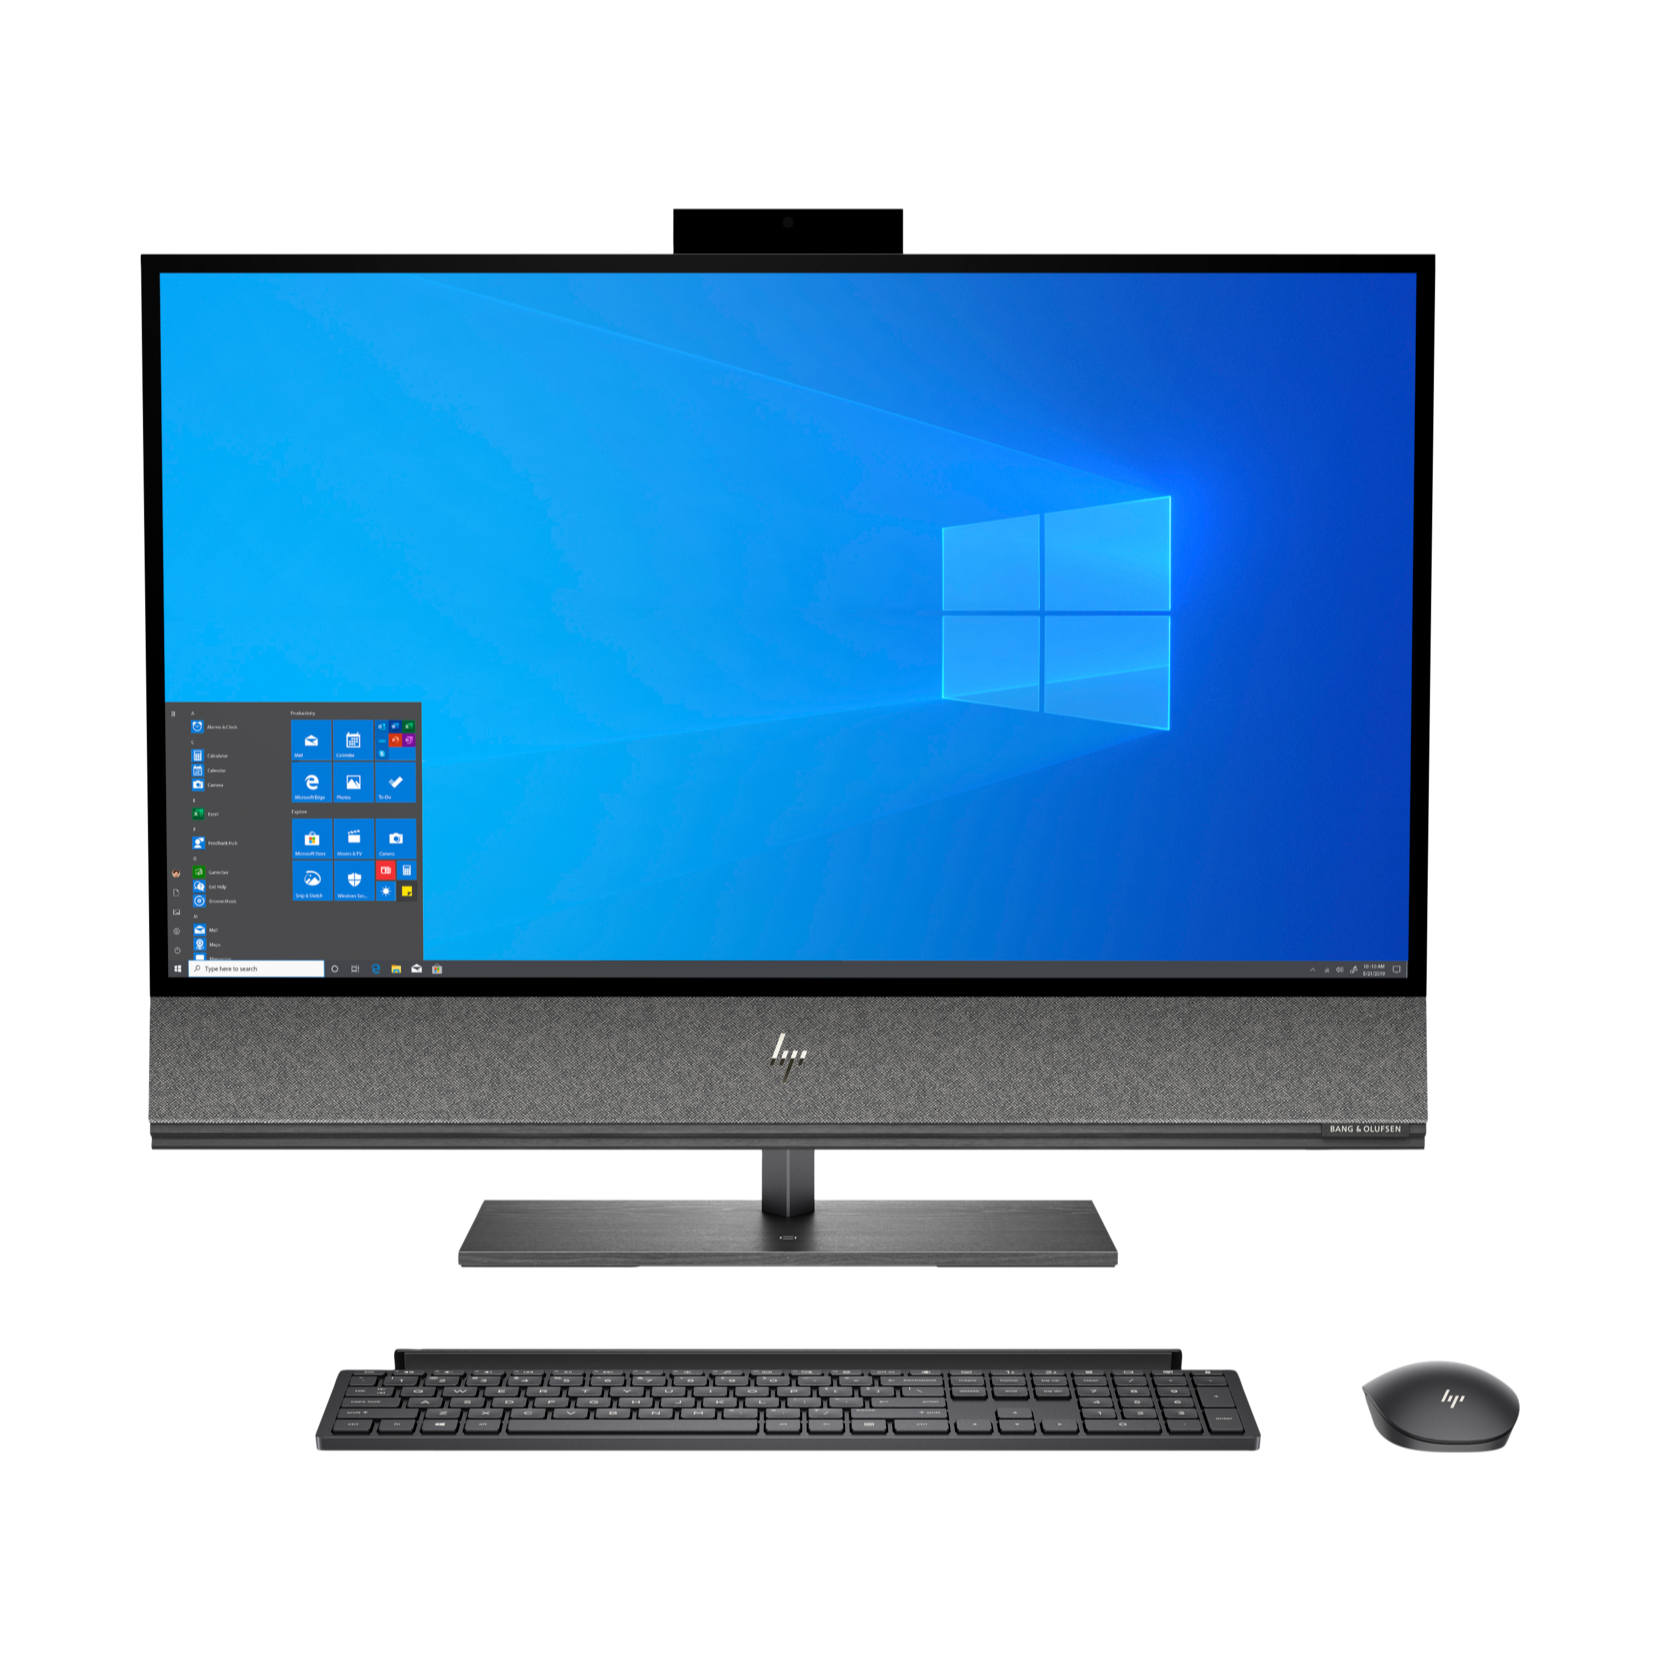 HP Envy all in one 32-A0055, i7-9700, 31.5 inch 4K, 16GB, 512GB SSD and 1TB HDD, RTX 2060, Windows 10 All in One 6